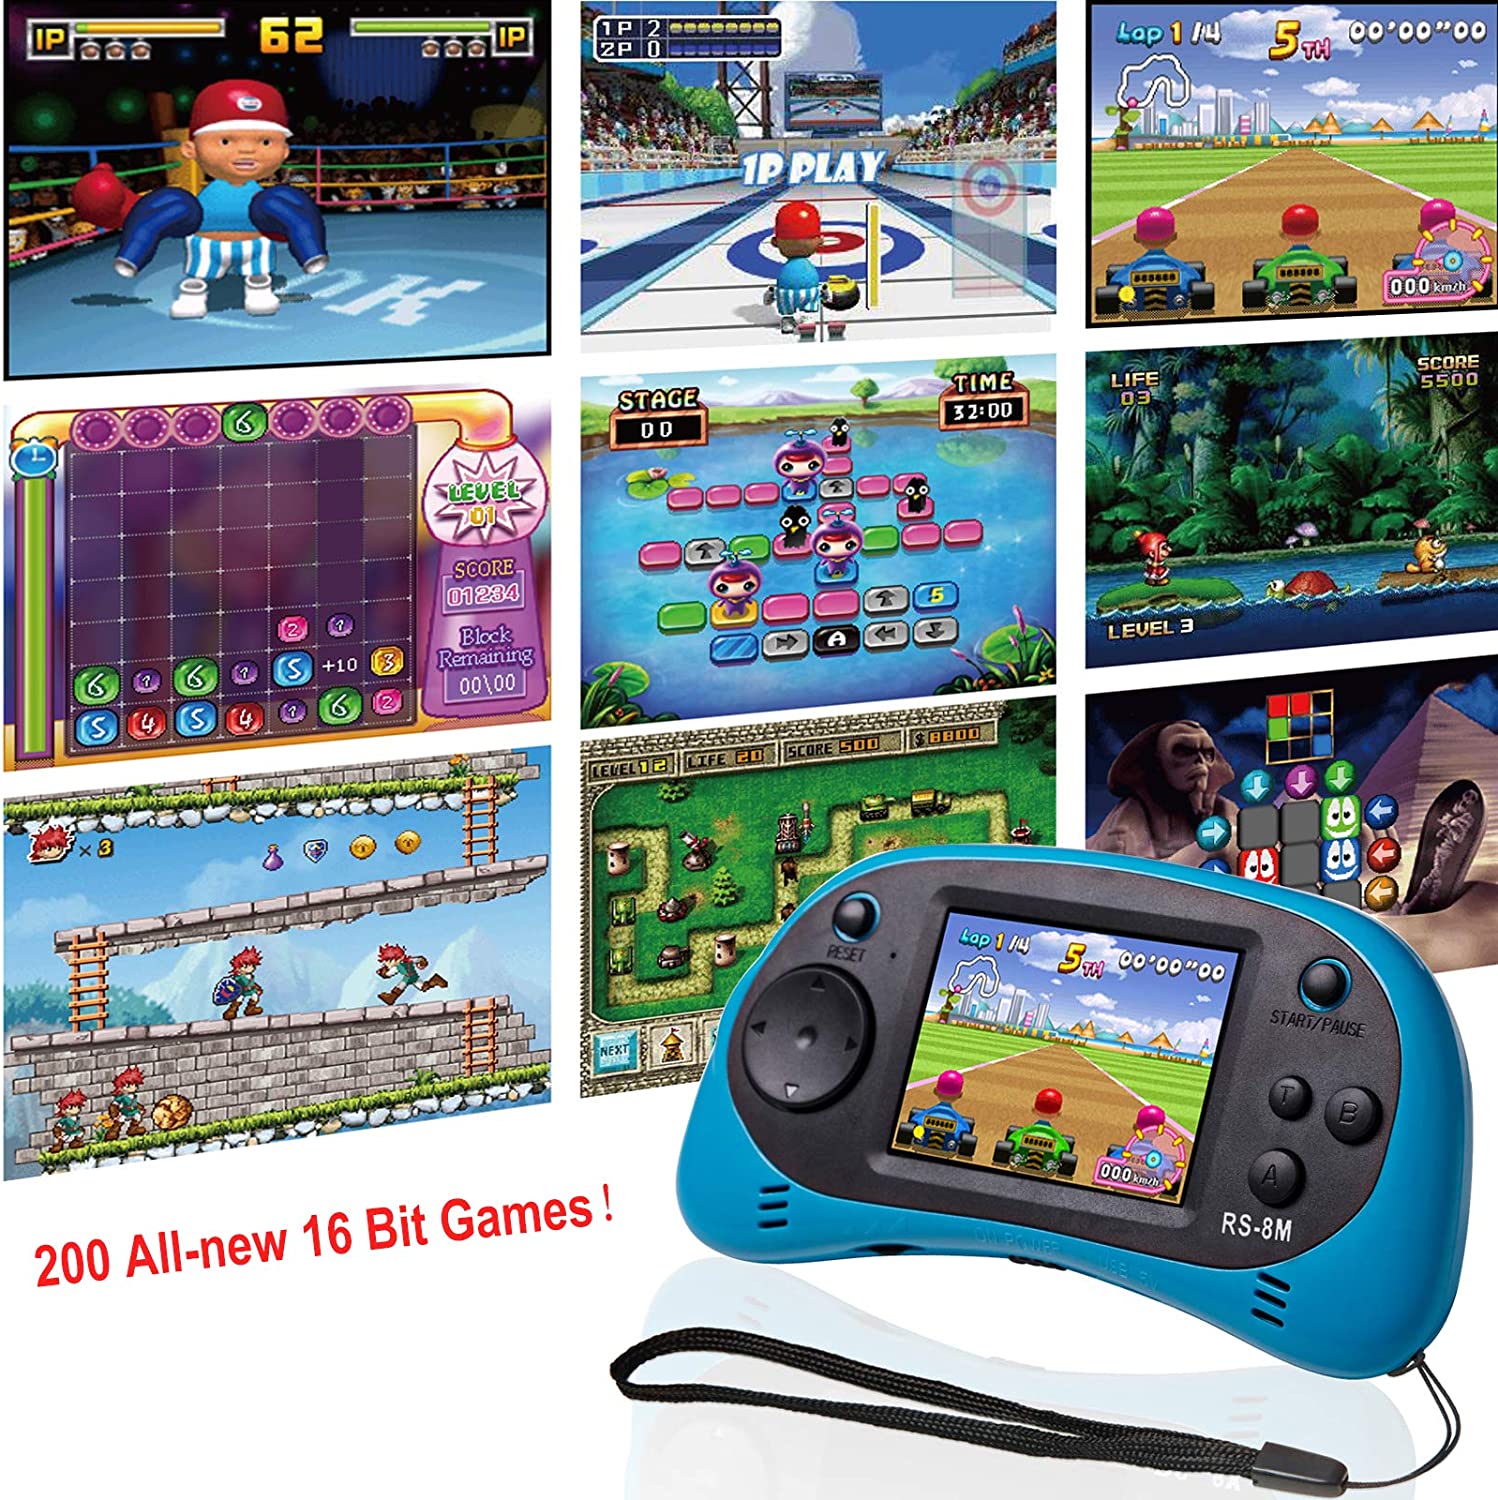 Kids Handheld Game Portable Video Game Player with 200 Games 16 Bit 2.5 Inch Screen Mini Retro Electronic Game Machine ,Best Gift for Kid (Blue)